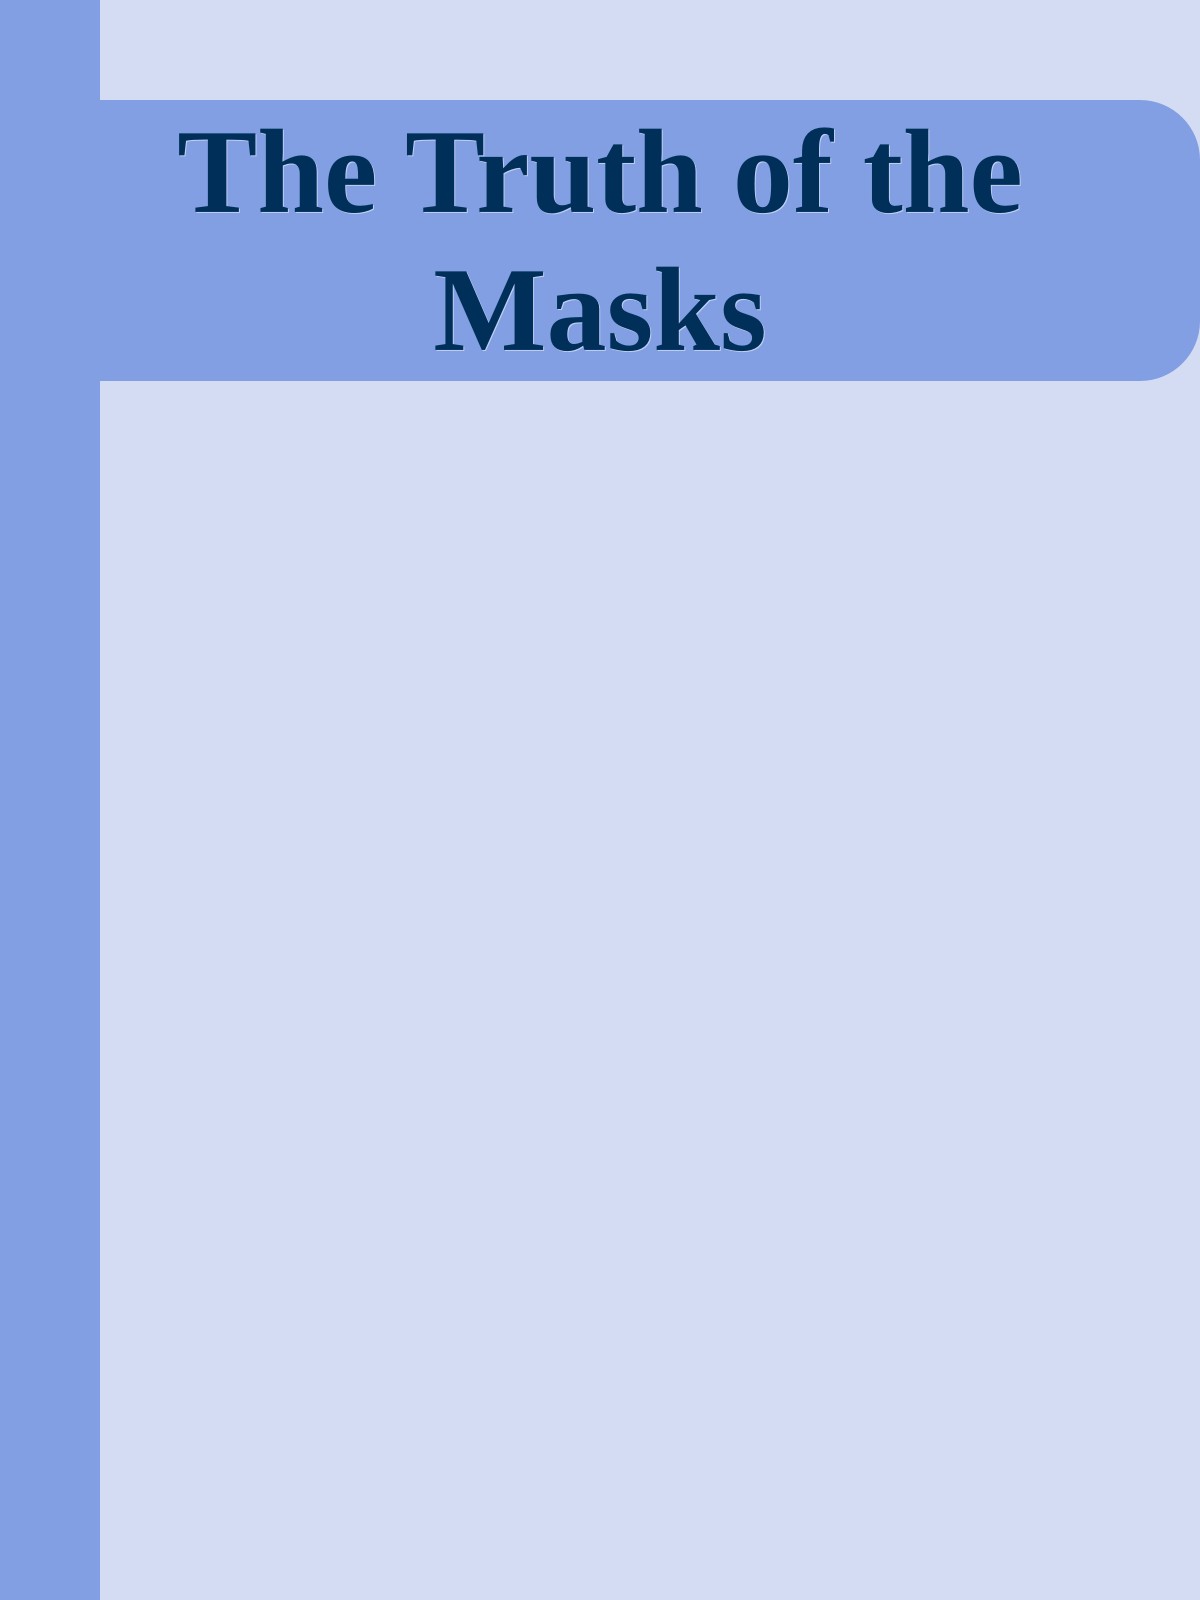 The Truth of the Masks